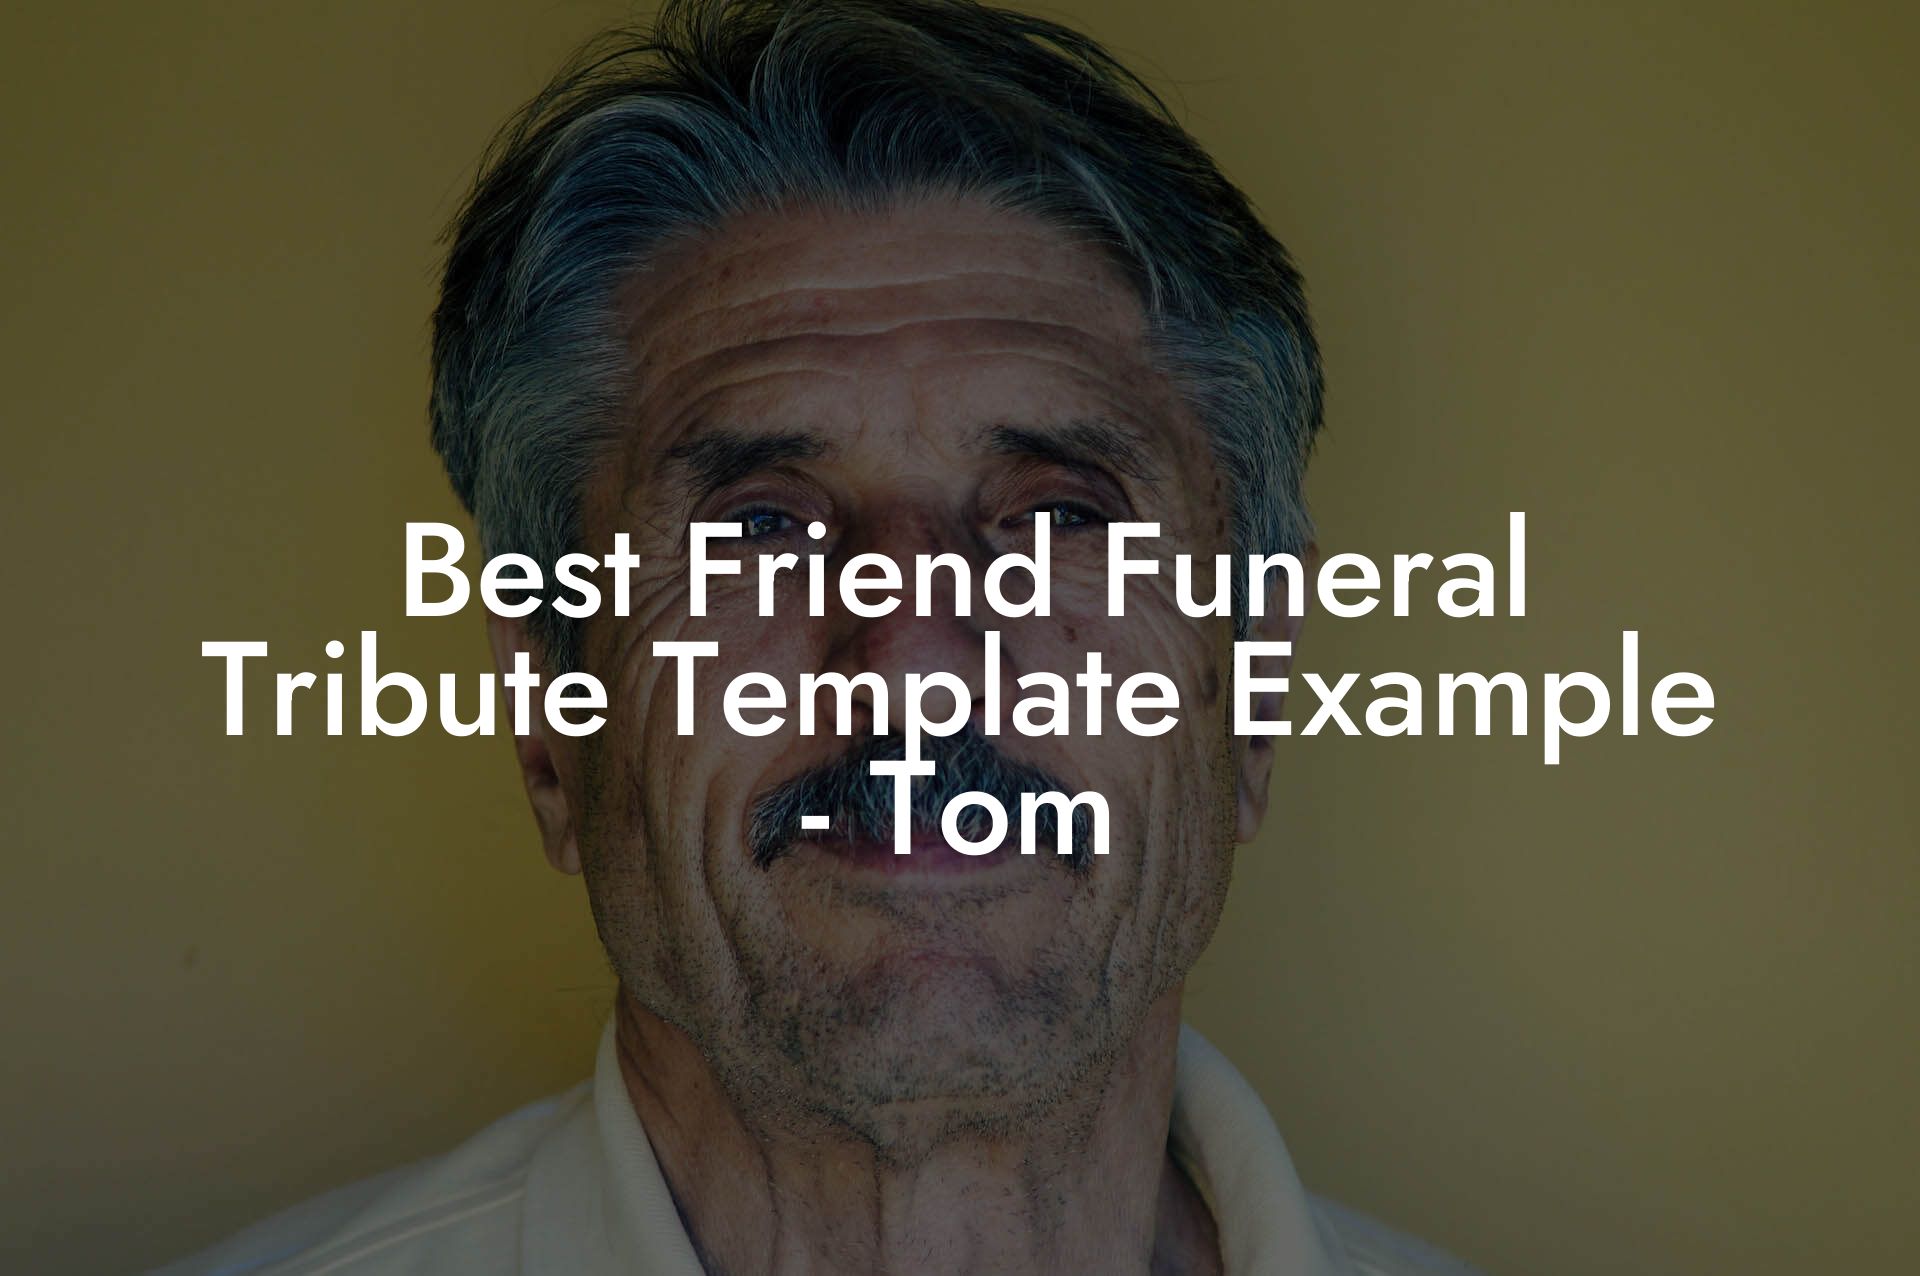 Best Friend Funeral Tribute Template Example - Tom